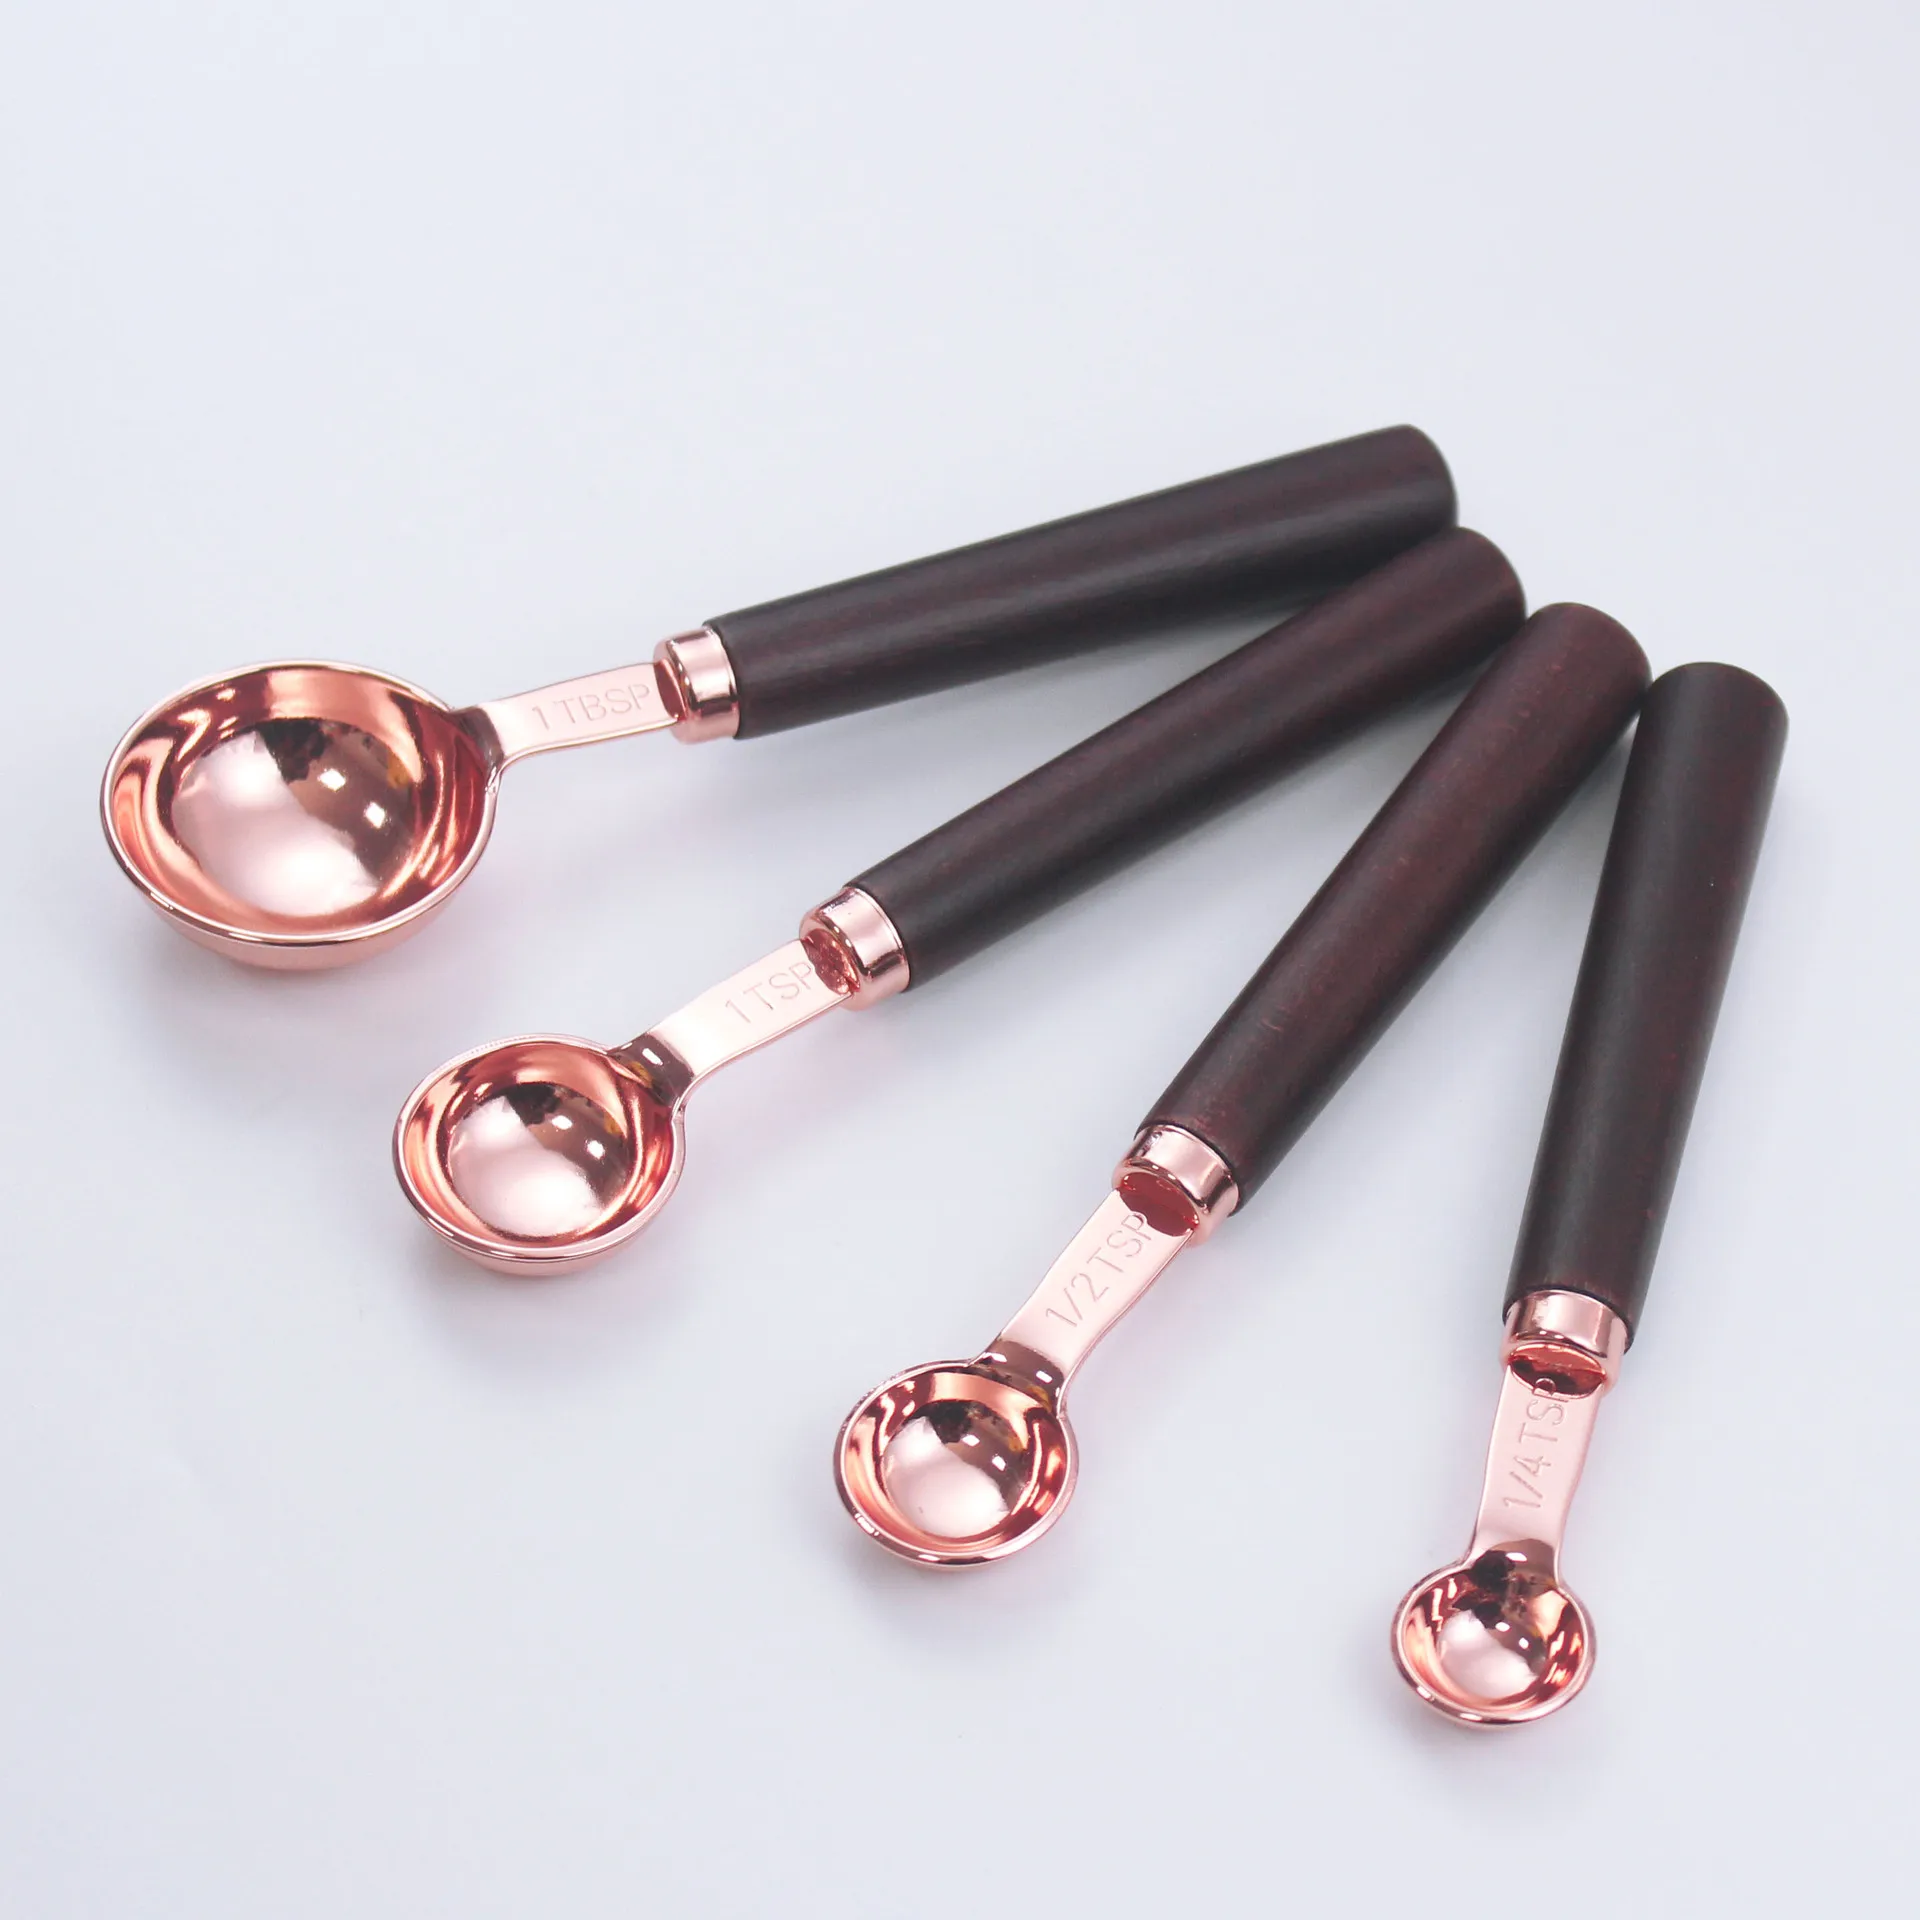 https://ae01.alicdn.com/kf/S91e91fc5742c43579464ac905eebc59d1/Rose-Gold-304-Stainless-Baking-Steel-Measuring-Cup-Spoon-With-Walnut-Handle-For-Baking-Tool-Set.jpg